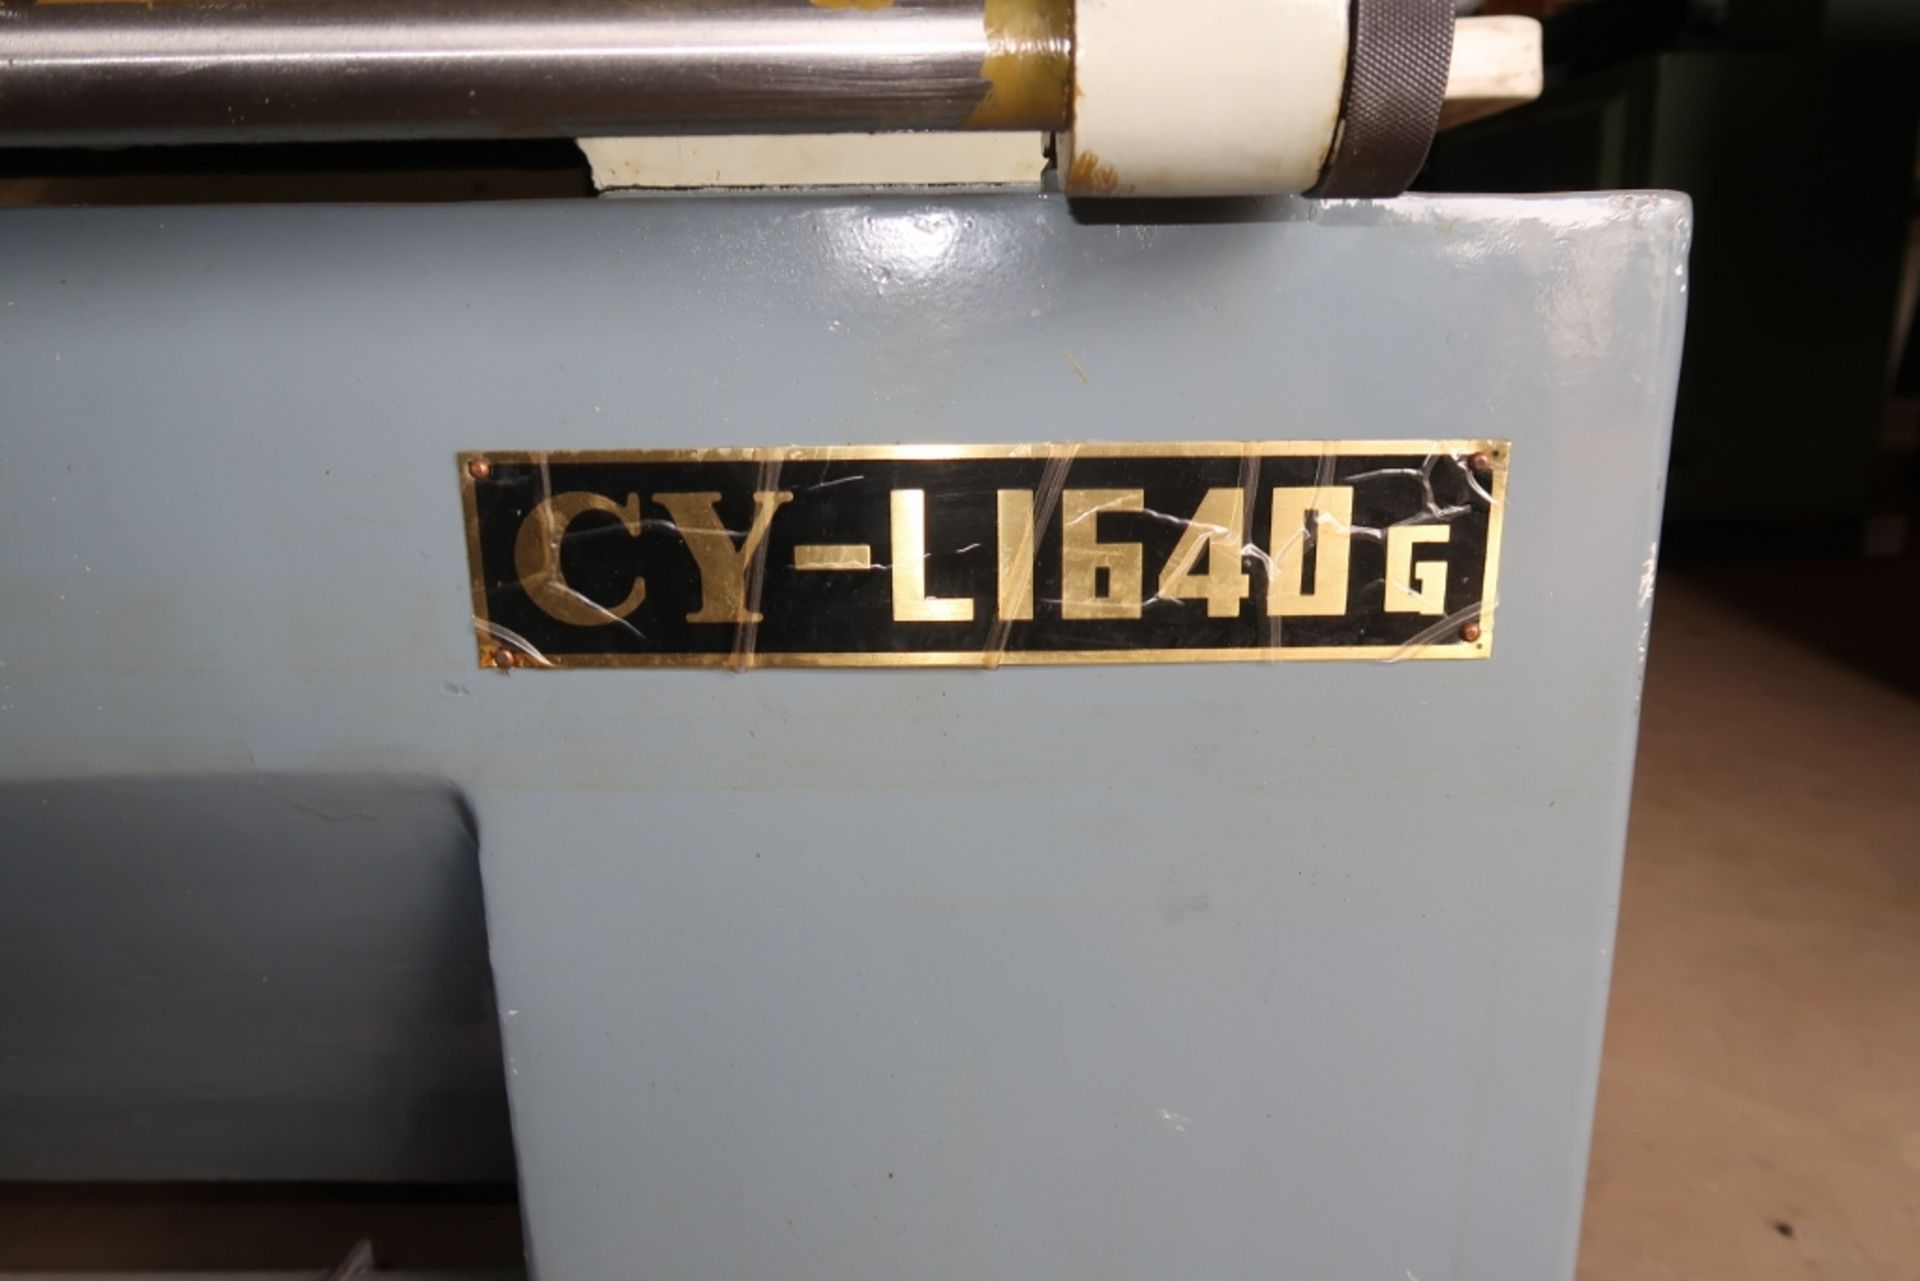 YUNNAN CY-L1640G LATHE W/ 3 JAW CHUCK 60" BED - Image 7 of 10